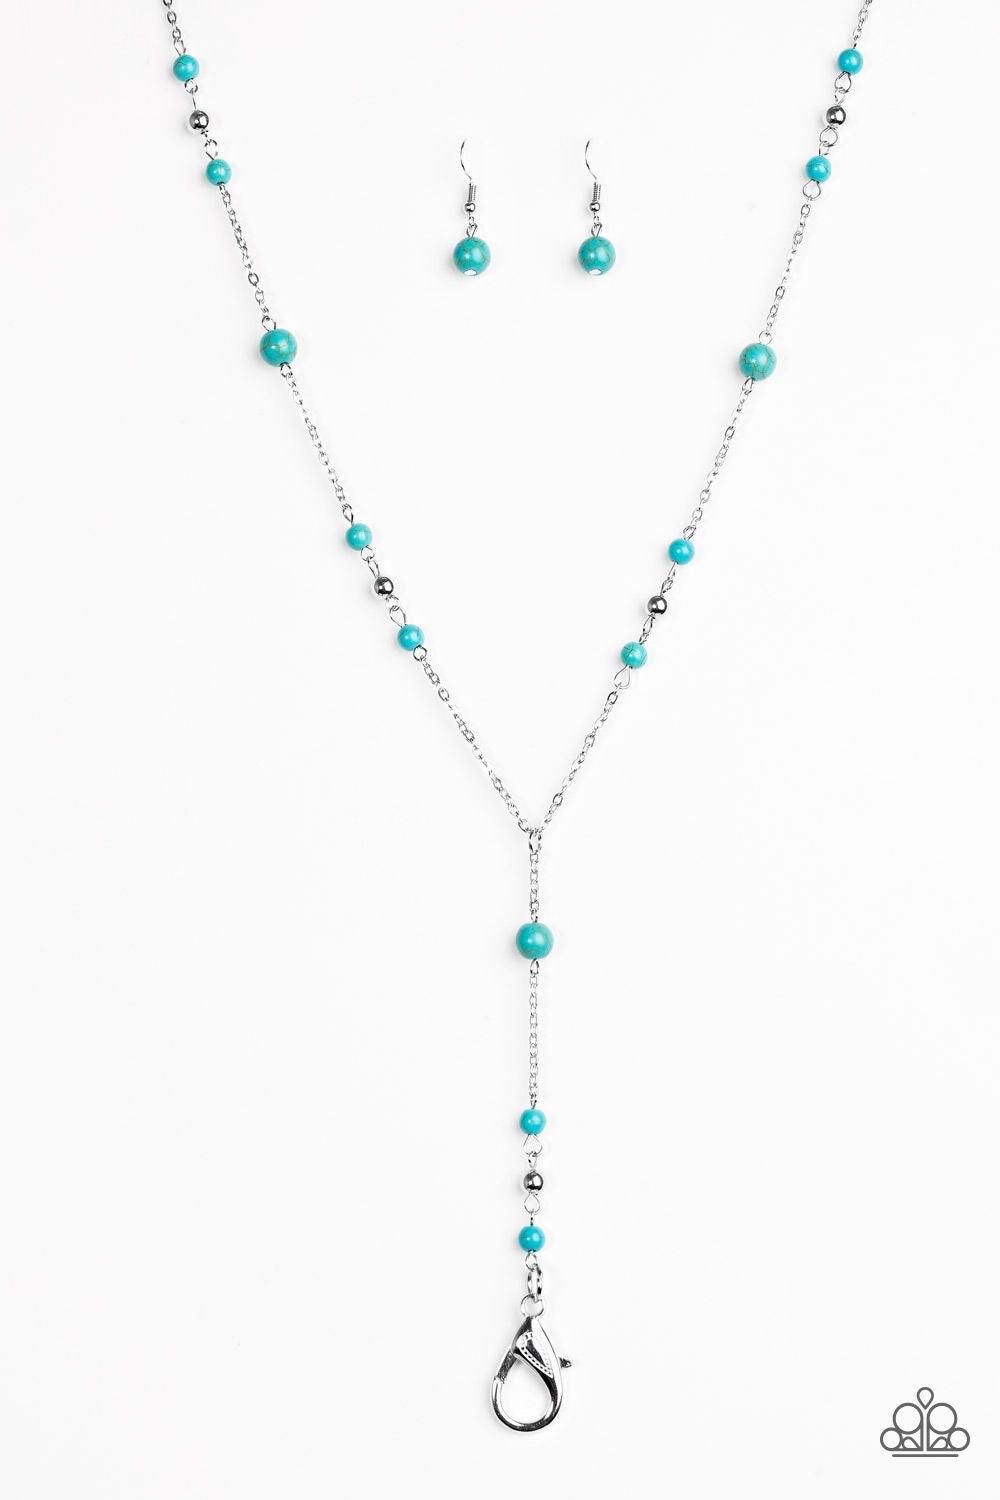 Paparazzi Accessories Modern Moutaineer - Blue *Lanyard Dainty turquoise stone and shiny silver beads trickle along a shimmery silver chain for a seasonal look. Matching beading trickles down an extended silver chain, creating an elegant elongating effect